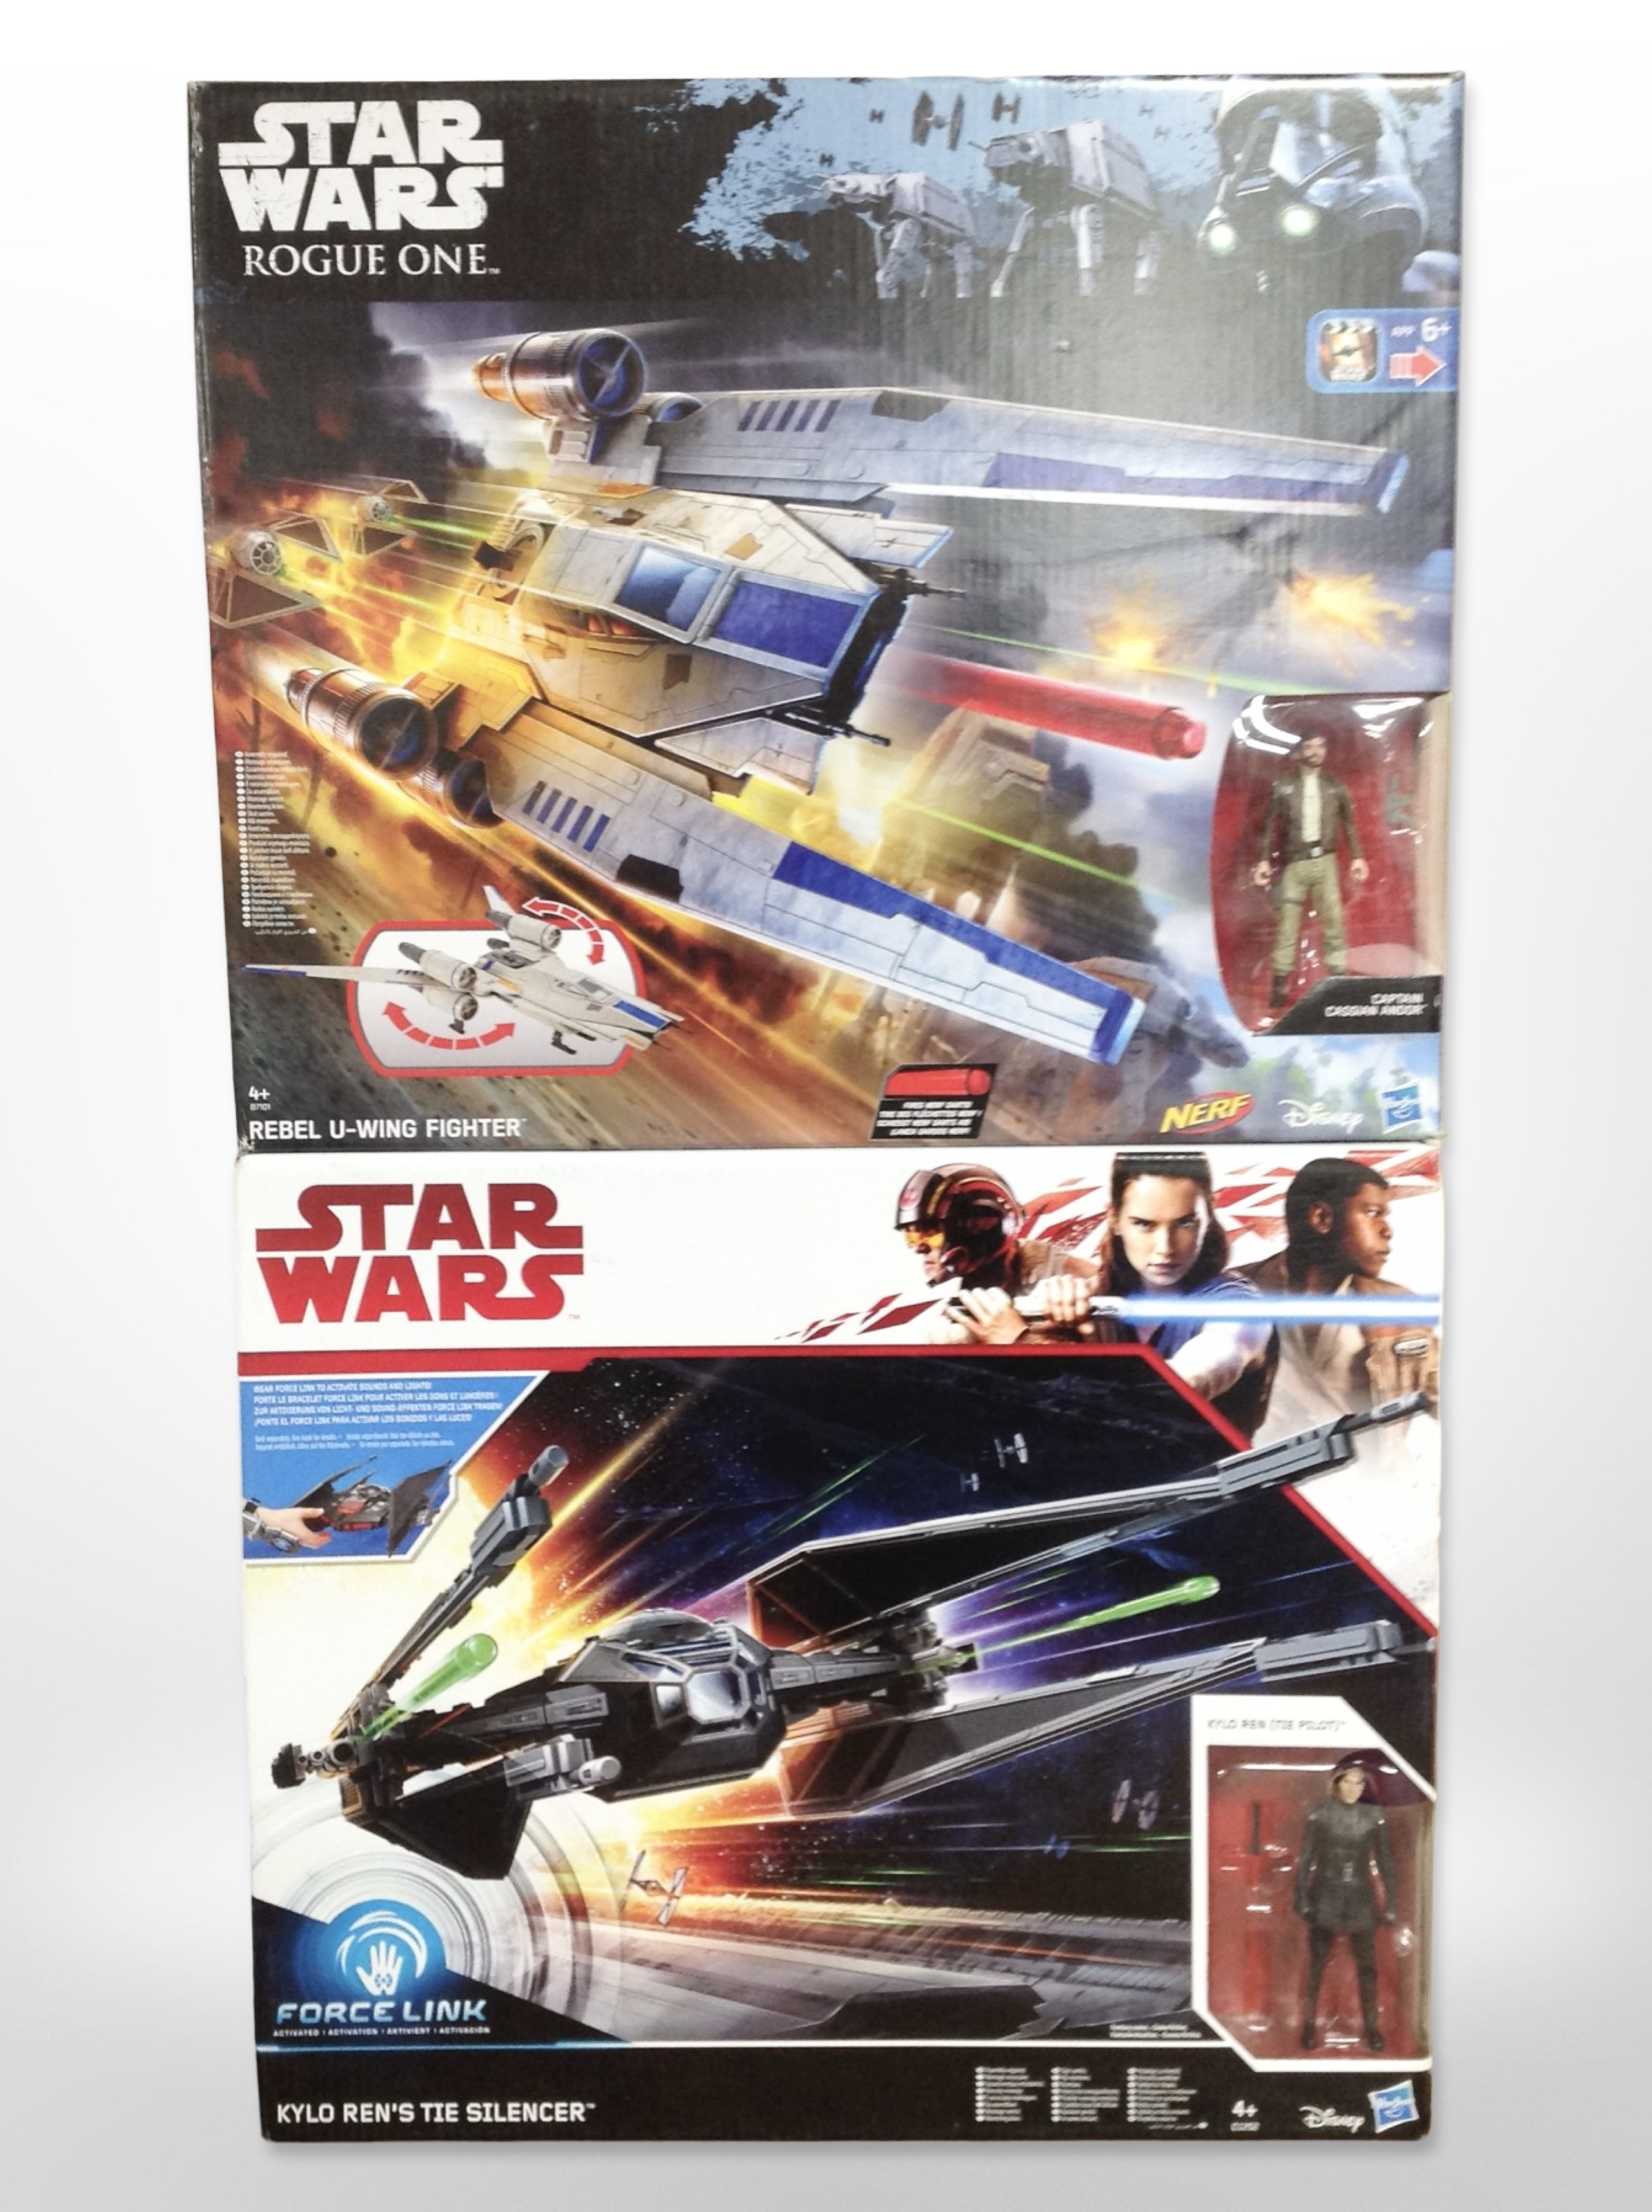 Two Hasbro Disney Star Wars models, Rebel U-Wing Fighter and Kylo Ren's Tie Silencer, boxed.